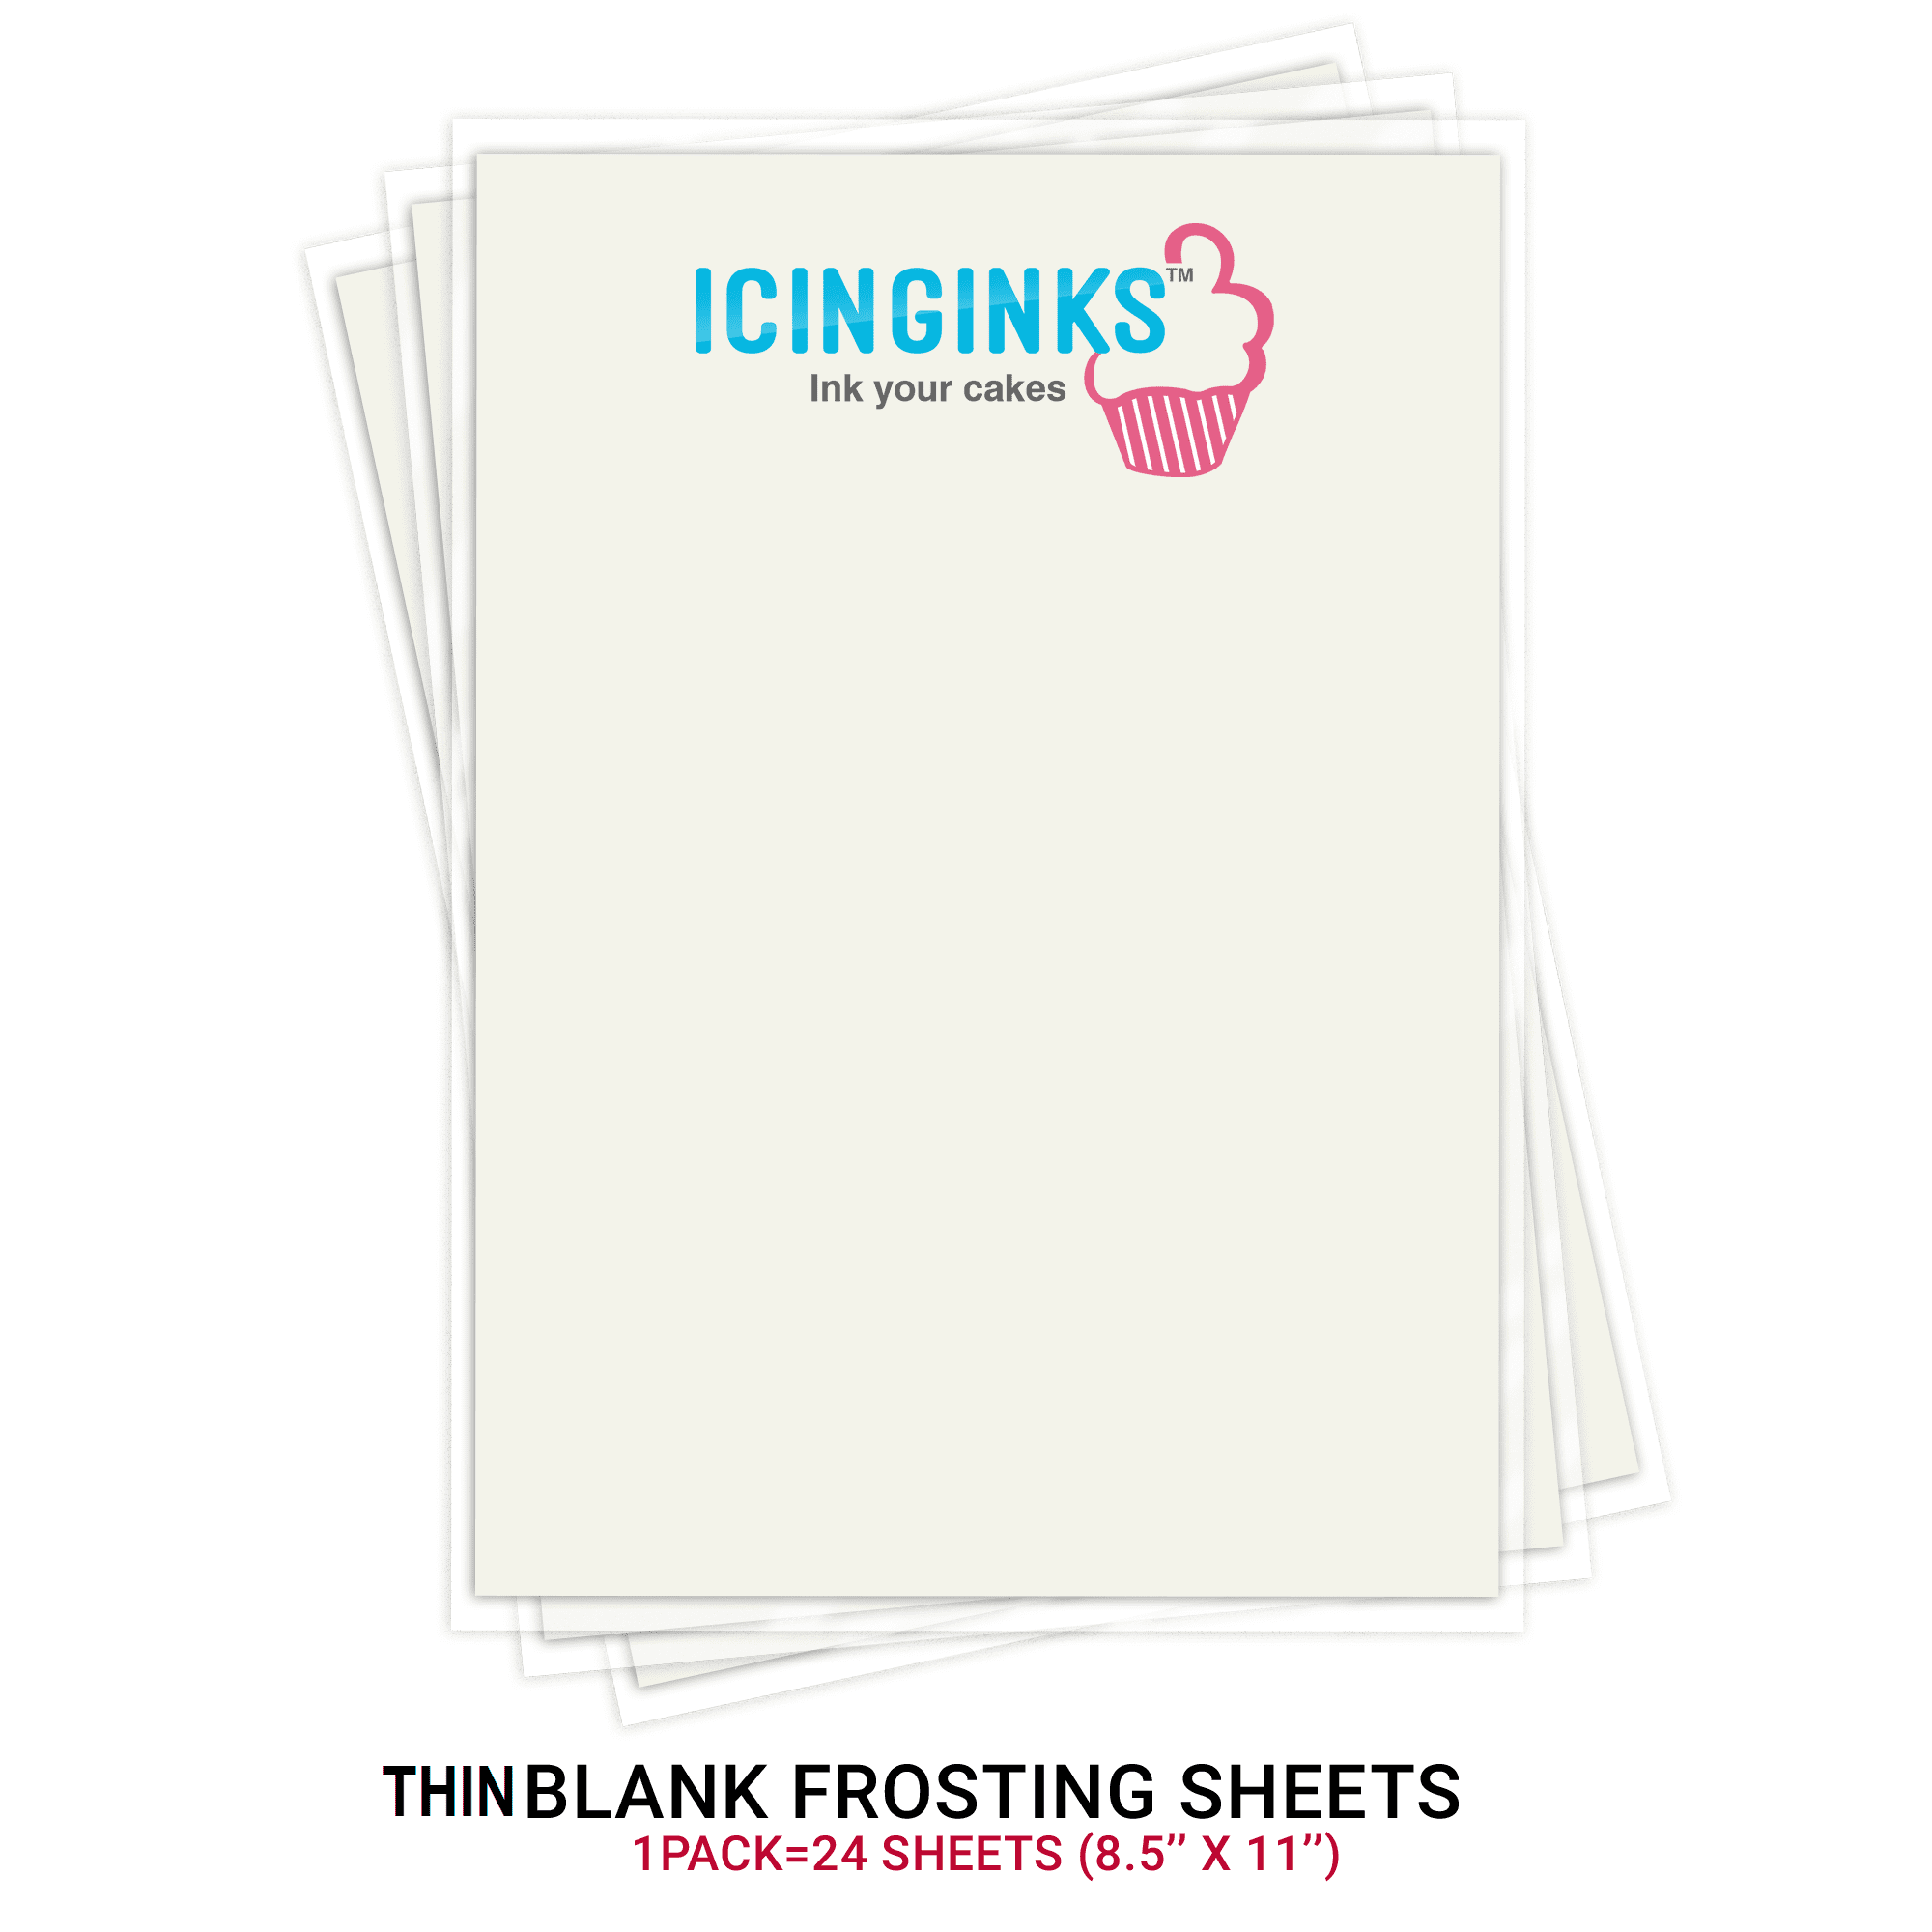 Printable Frosting Sheets,Edible Inks Edible Inks refills, 4 bottles of  colors and syringes edible paper.Photo Frost photos on cakes, photo cake,  photo cakes, picture cake, cookie picture, pictures on cakes, pictures on